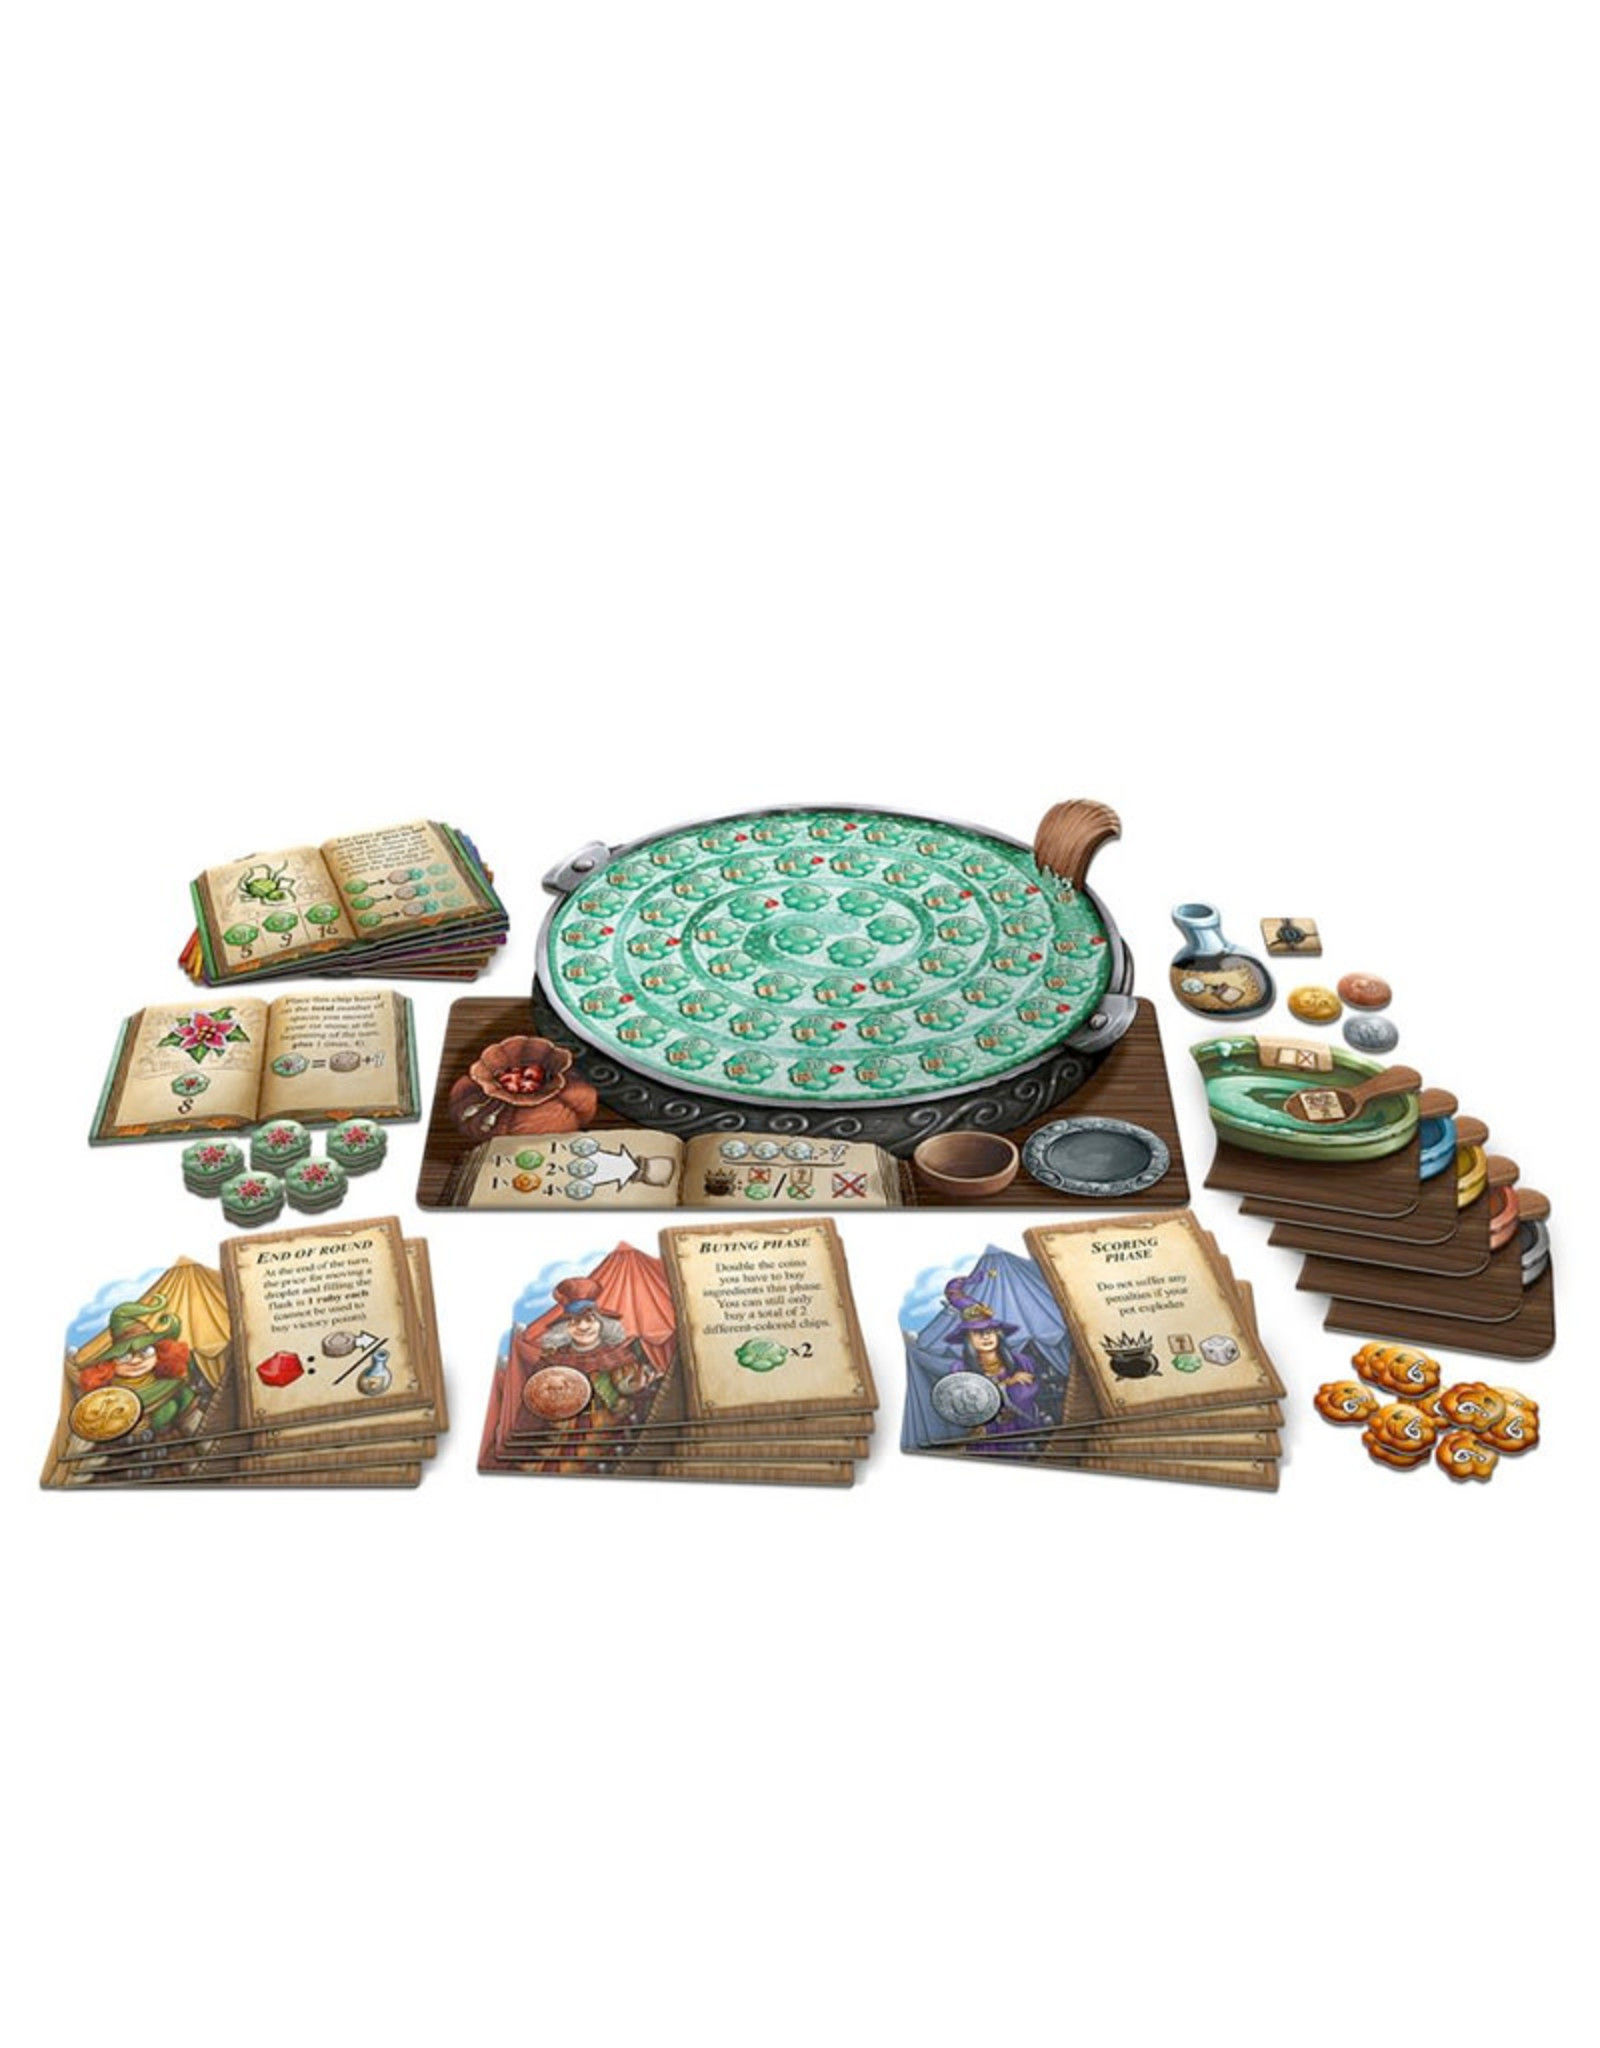 Northstar Games Quacks of Quedlinburg The Herb Witches